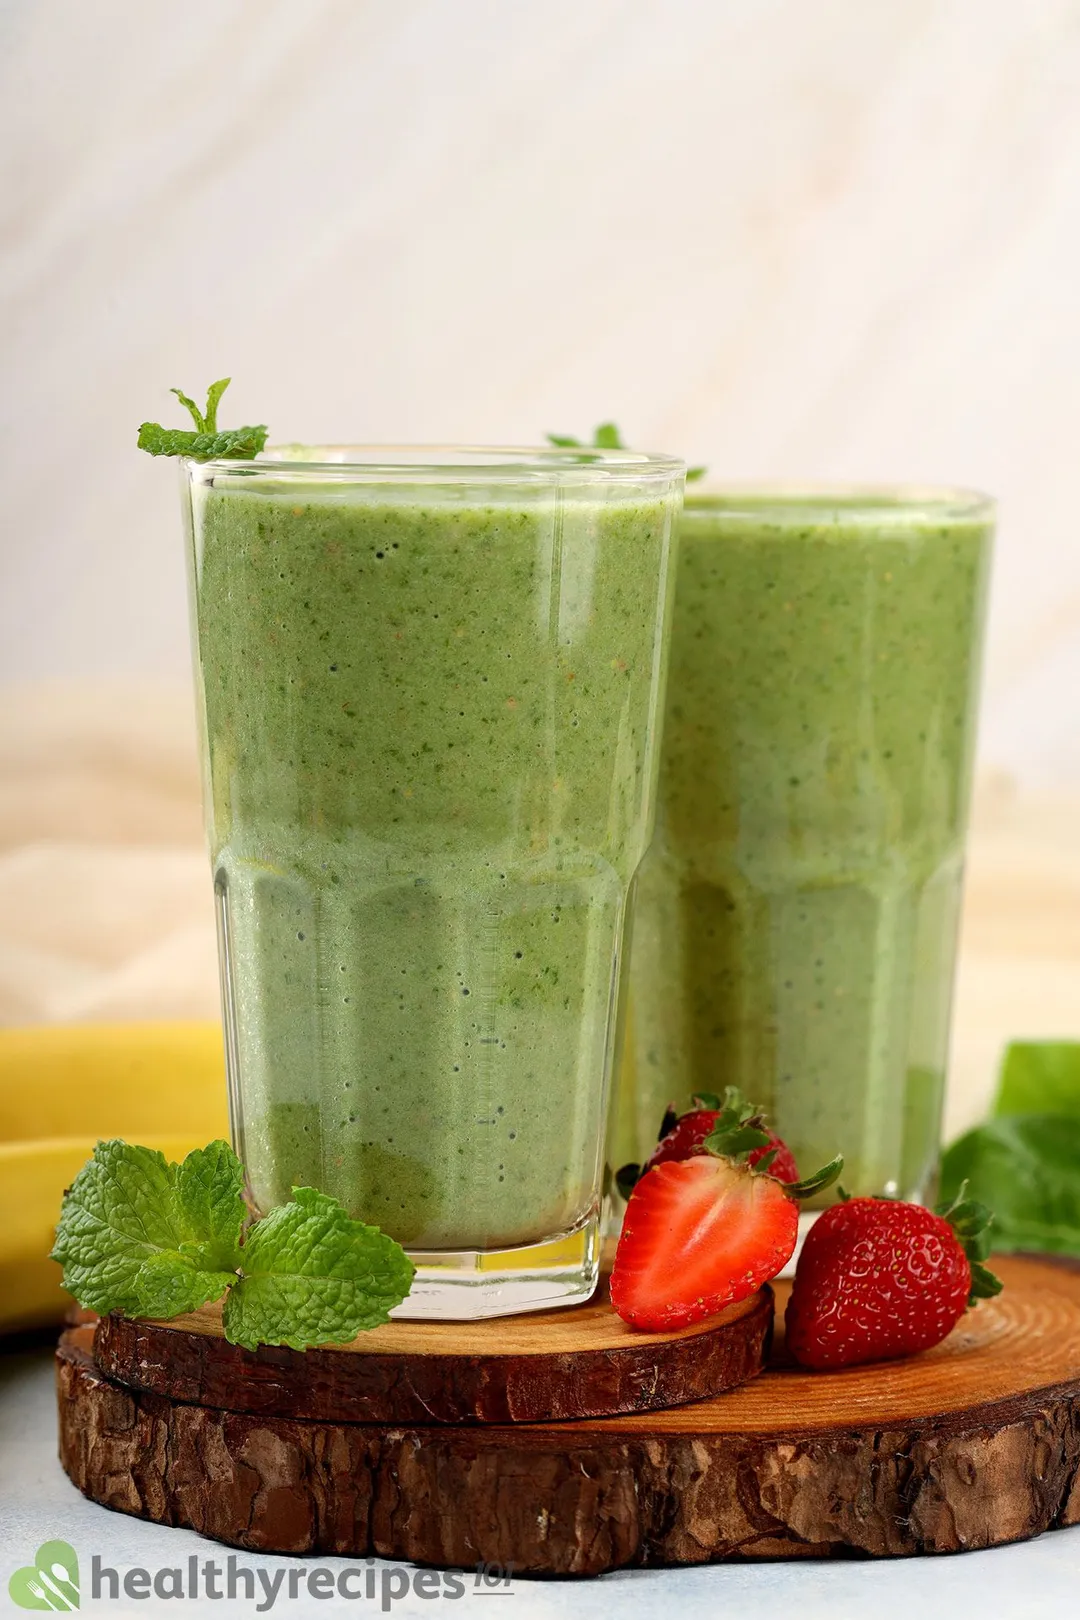 Two glasses of strawberry spinach banana smoothie placed on a wooden board and near mint leaves and strawberry slices.